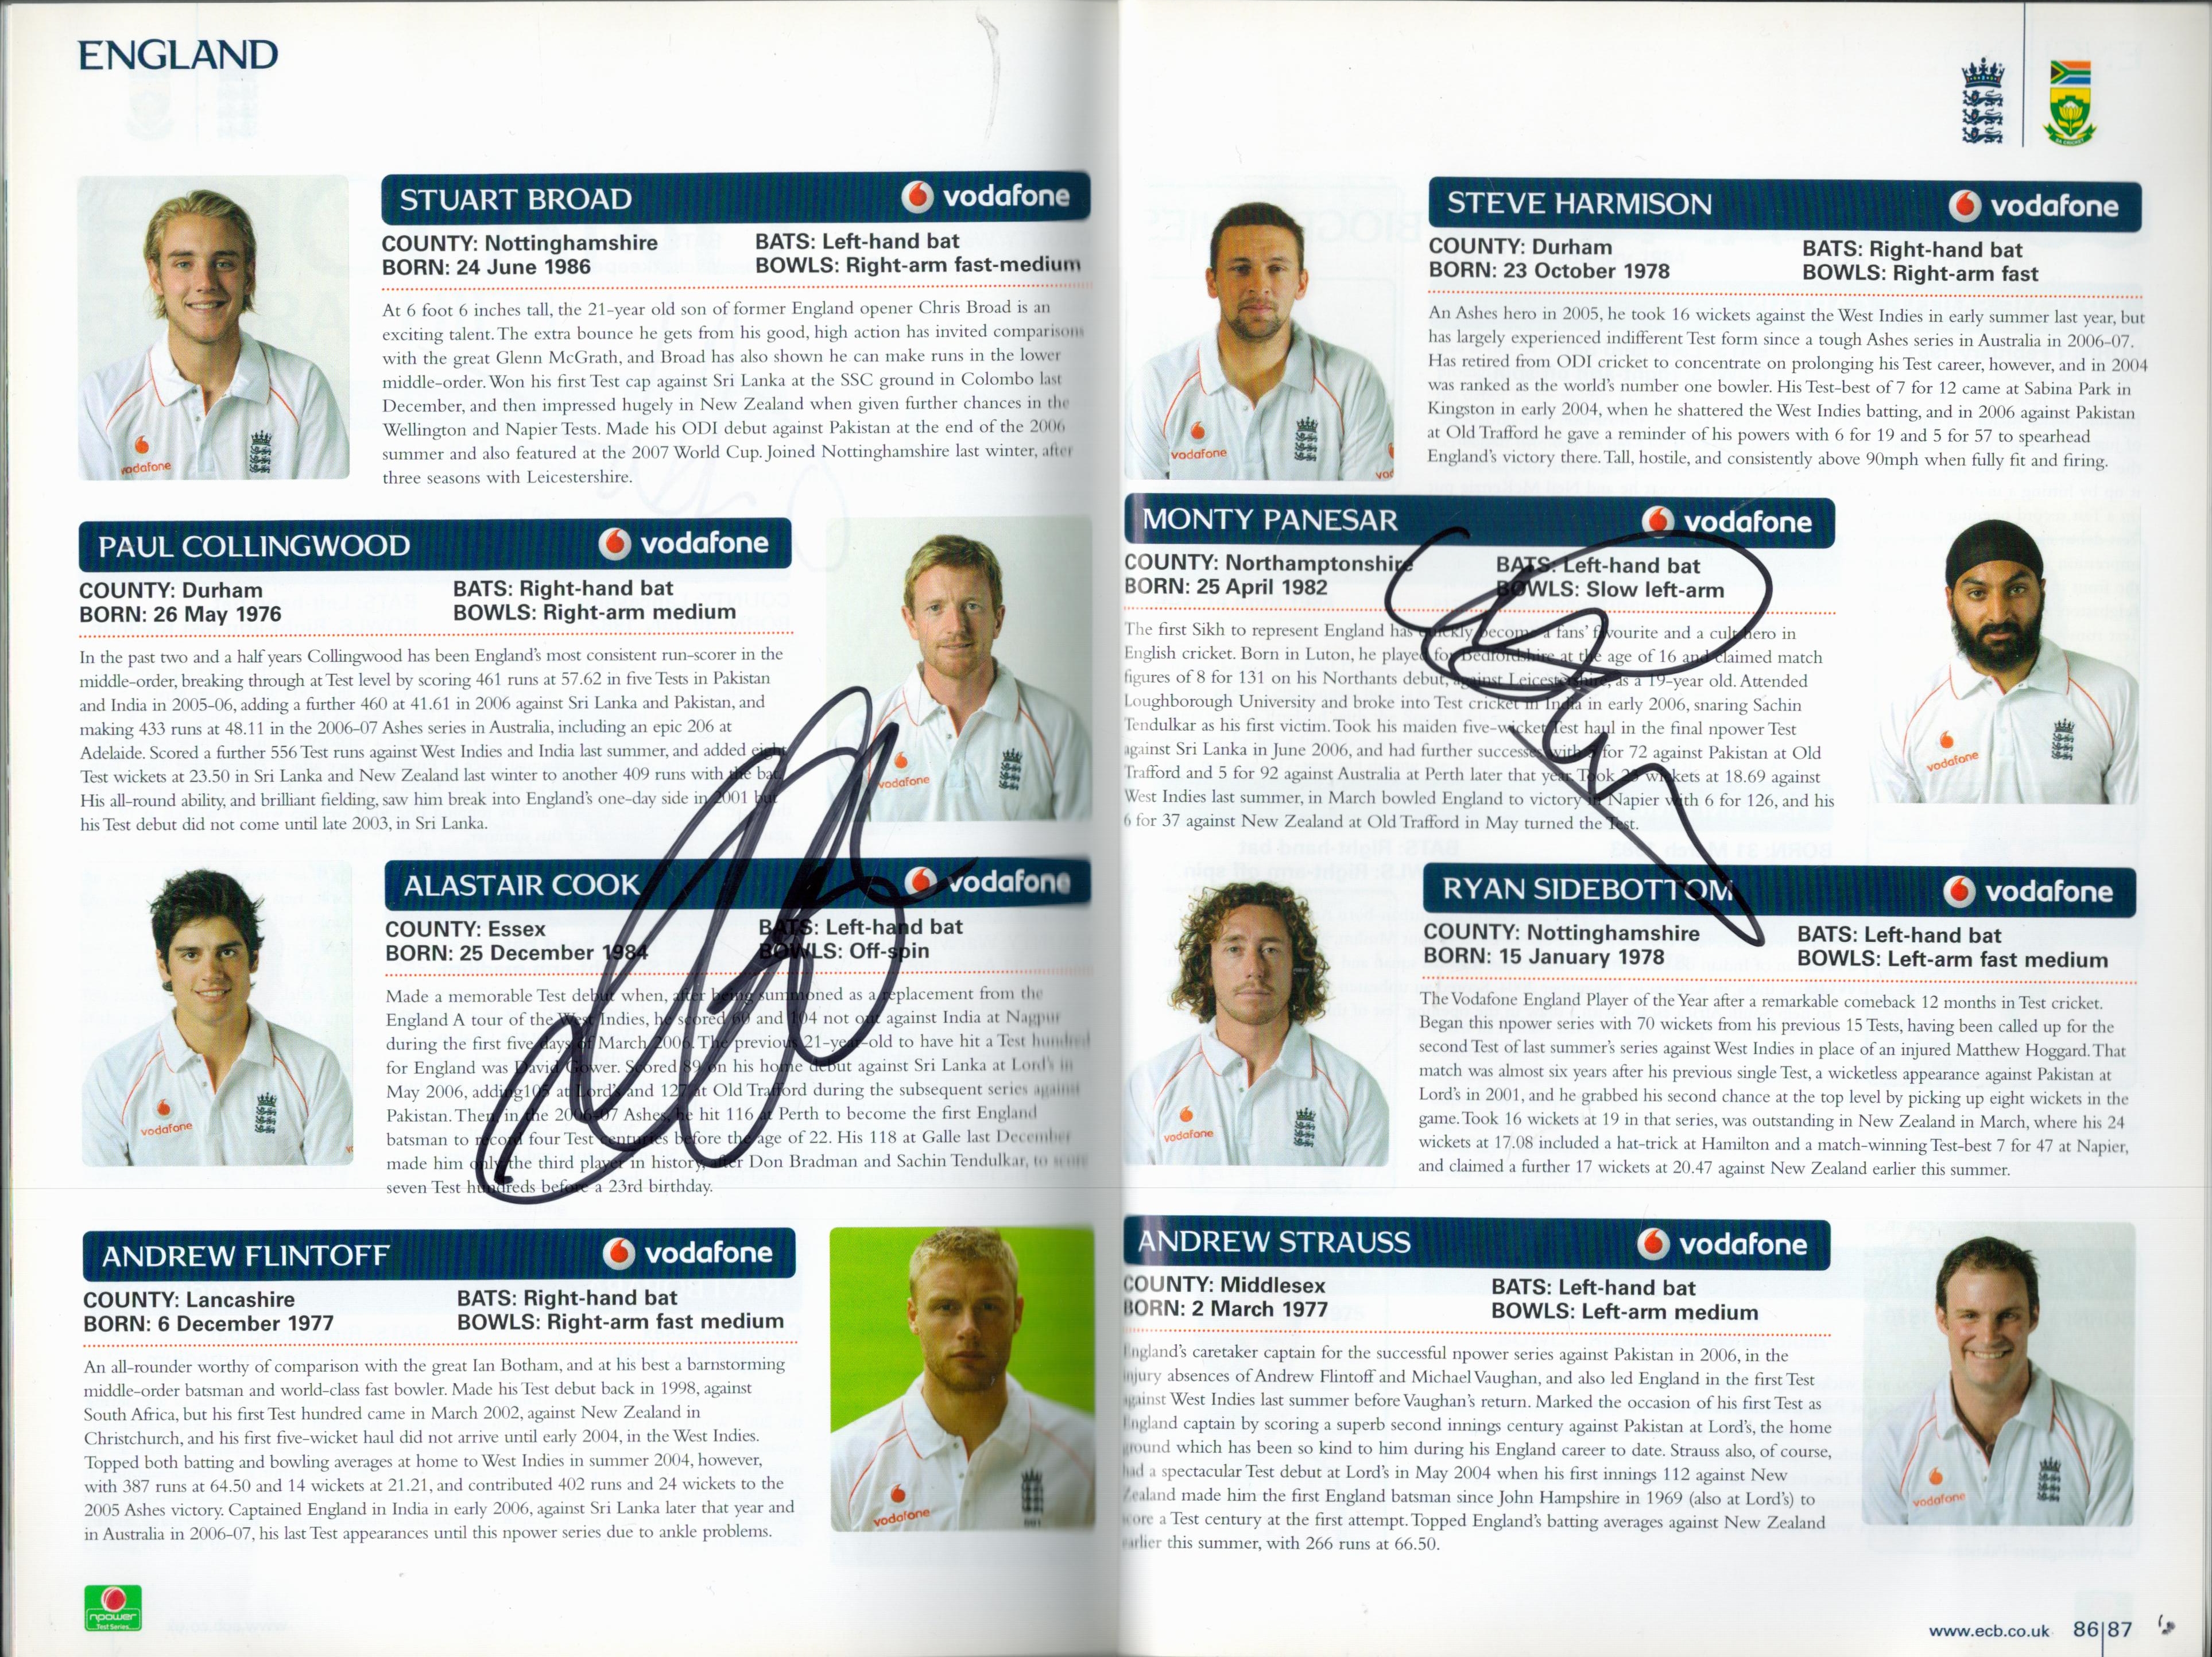 Alastair Cook, Monty Panesar and Tim Ambrose Signed England versus South Africa Test match cricket - Image 2 of 3